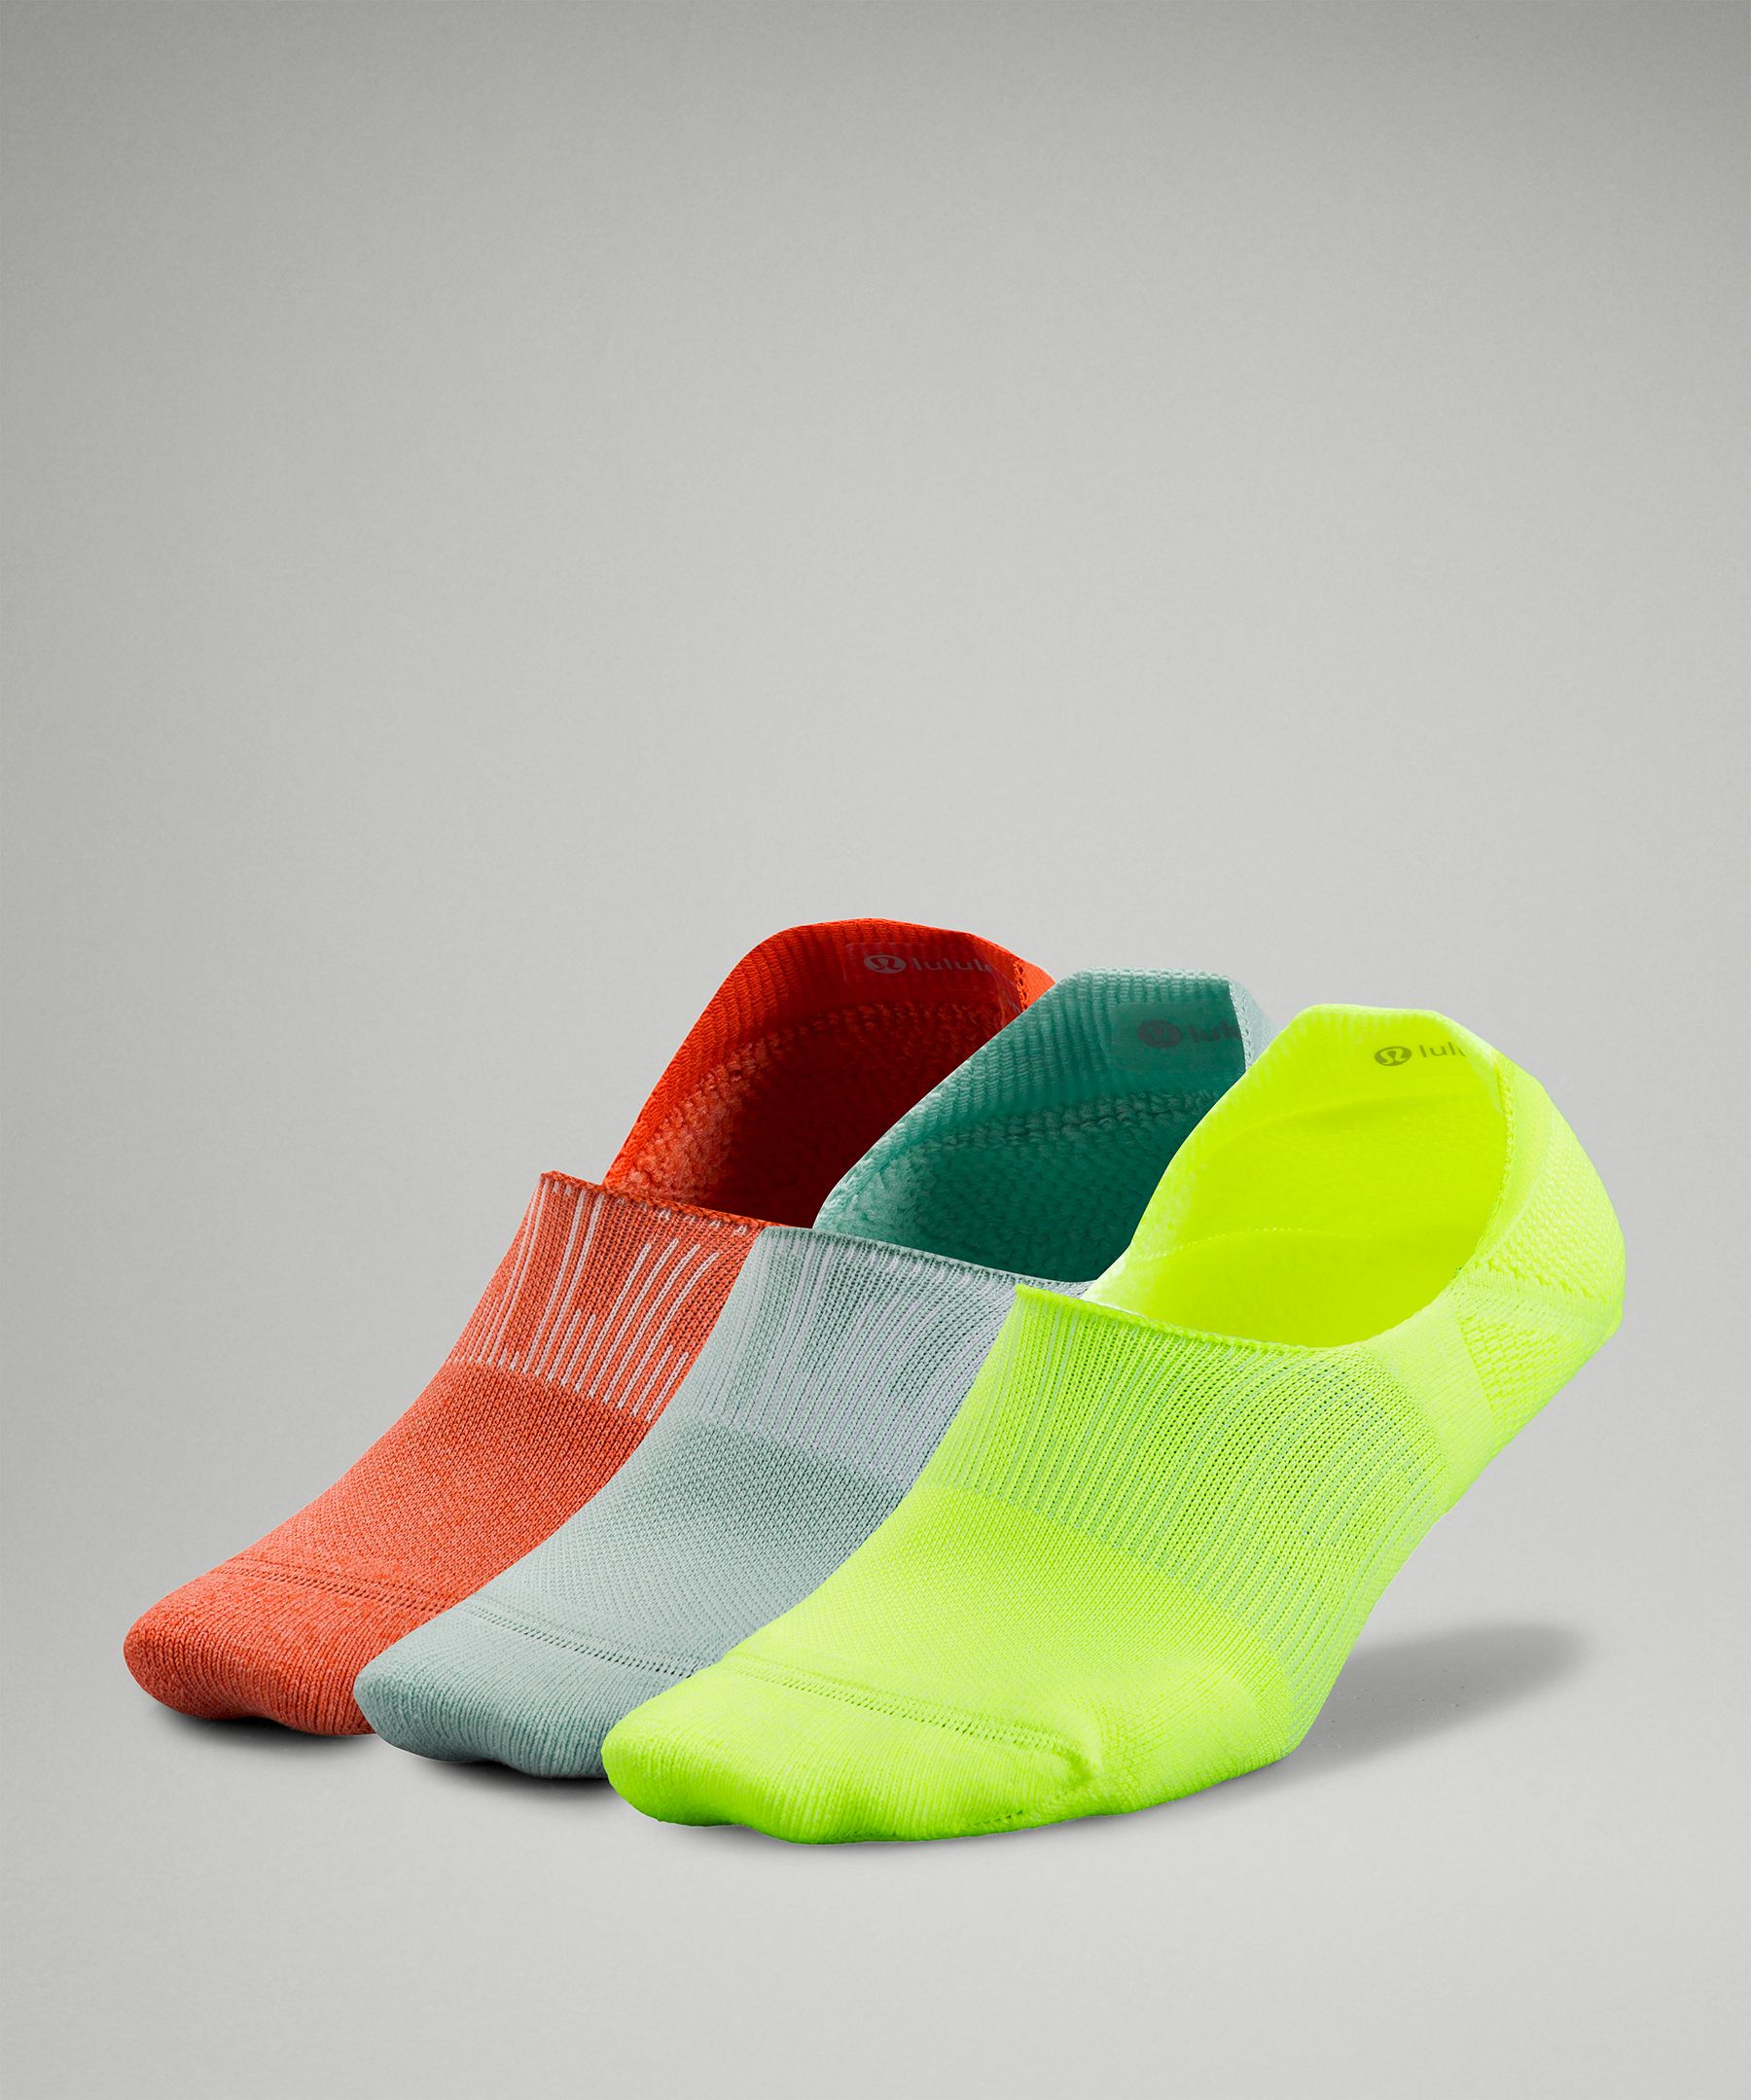 Lululemon Power Stride No-show Socks With Active Grip 3 Pack In Highlight Yellow/arctic Green/canyon Orange